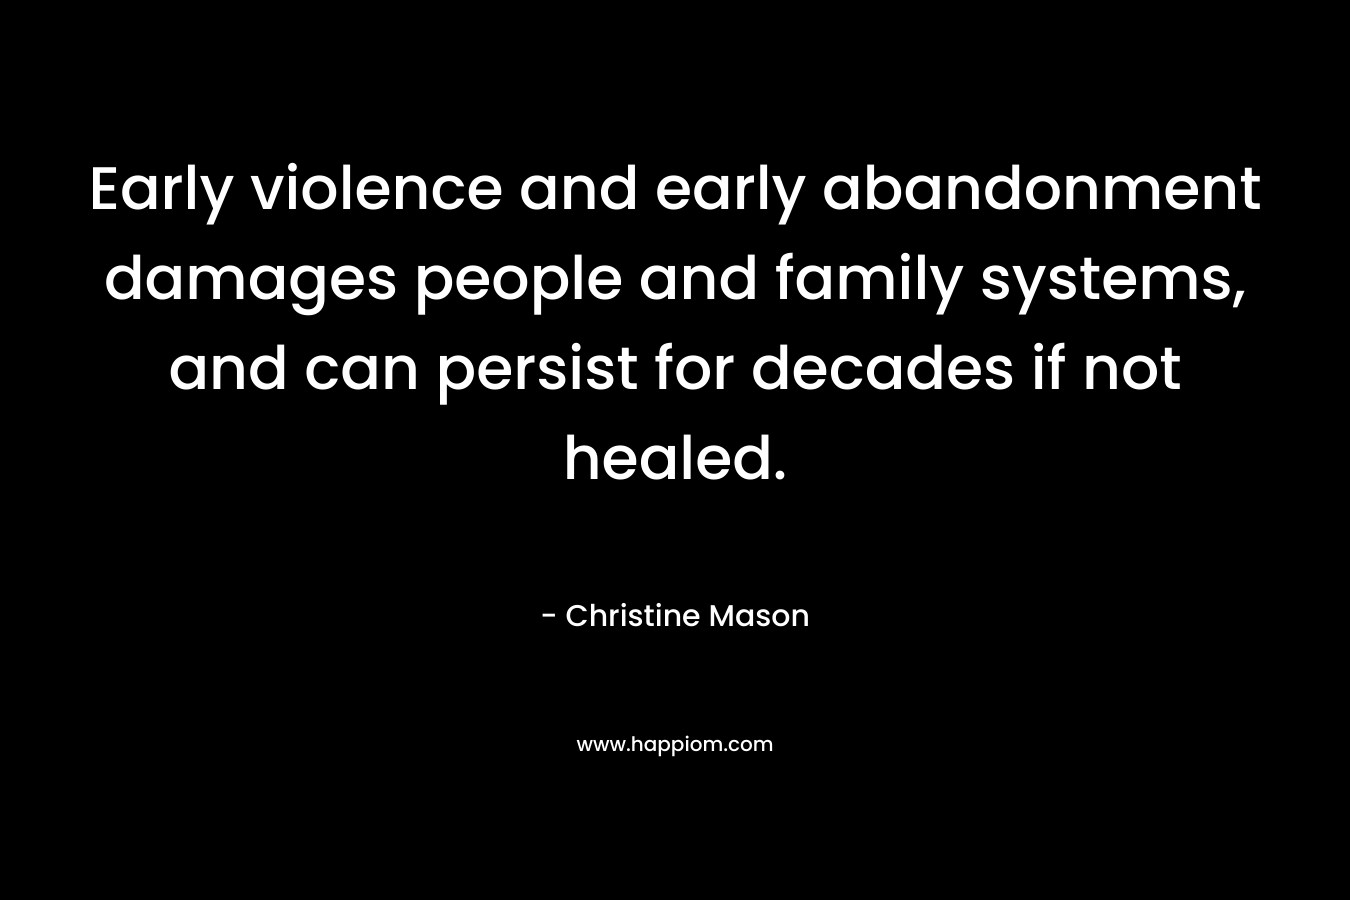 Early violence and early abandonment damages people and family systems, and can persist for decades if not healed. – Christine Mason